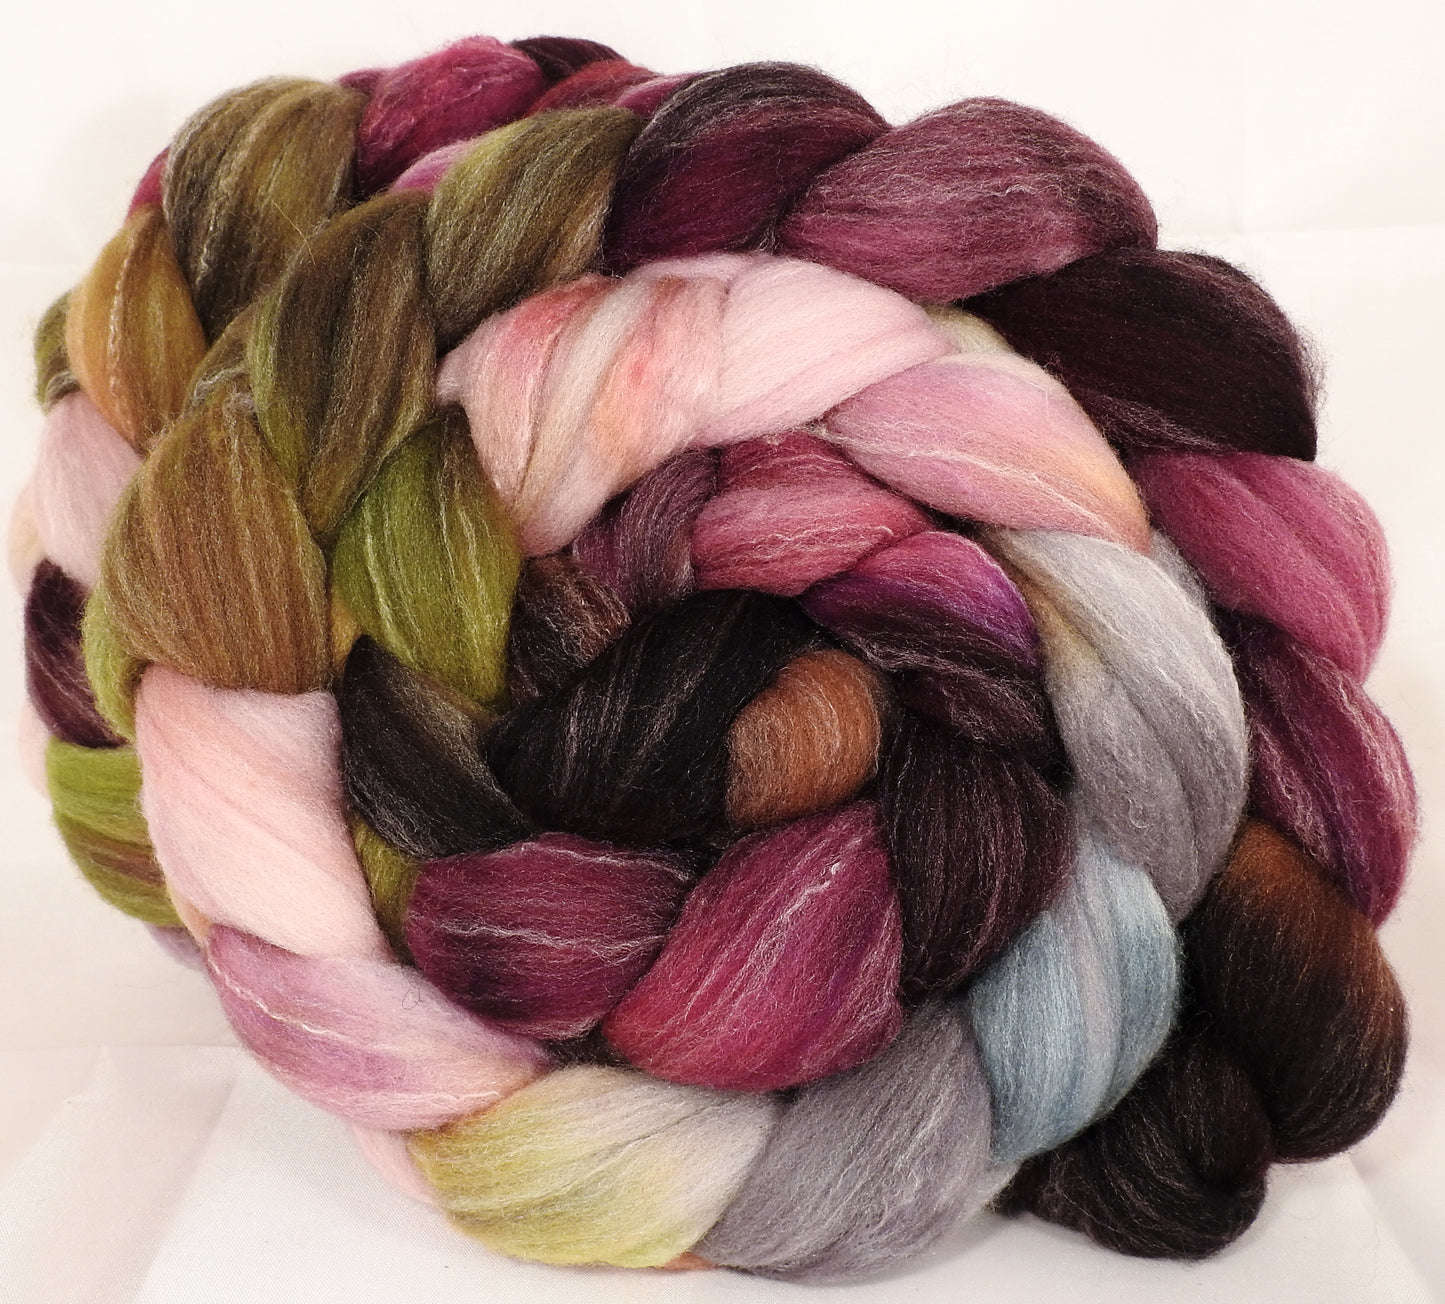 Hand dyed top for spinning - Beauty and the Beast - (5.2 oz.) Targhee/silk/ bamboo ( 80/10/10) - Inglenook Fibers